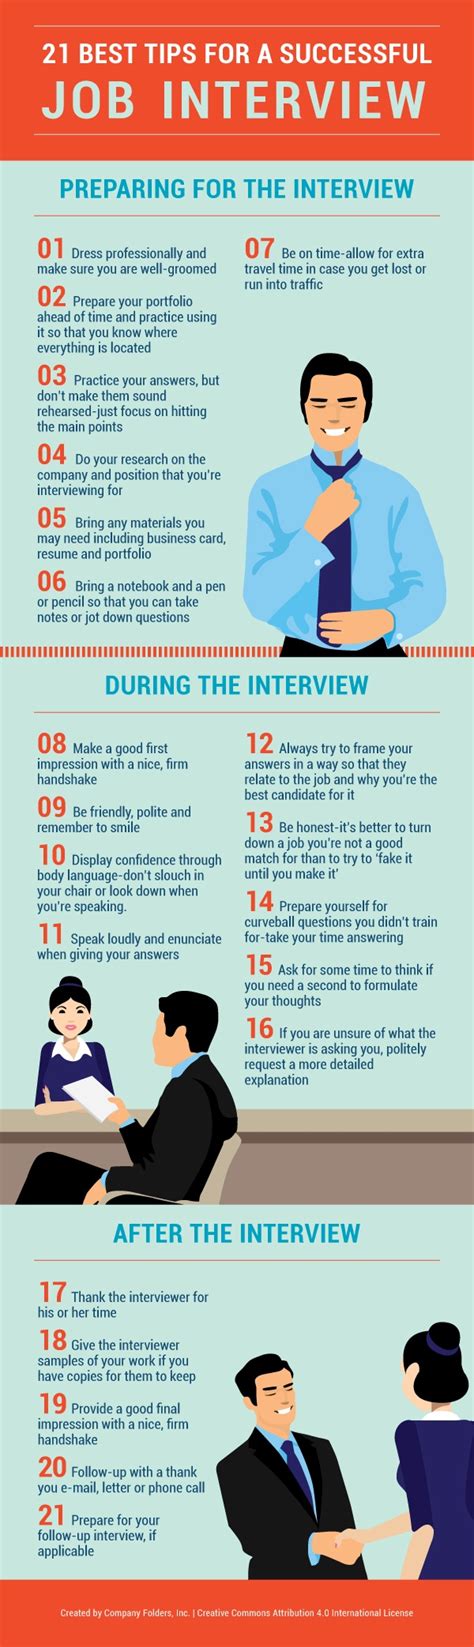 Interview a quick guide to winning the job interviews. - Curriculum studies guidebooks by marla morris.